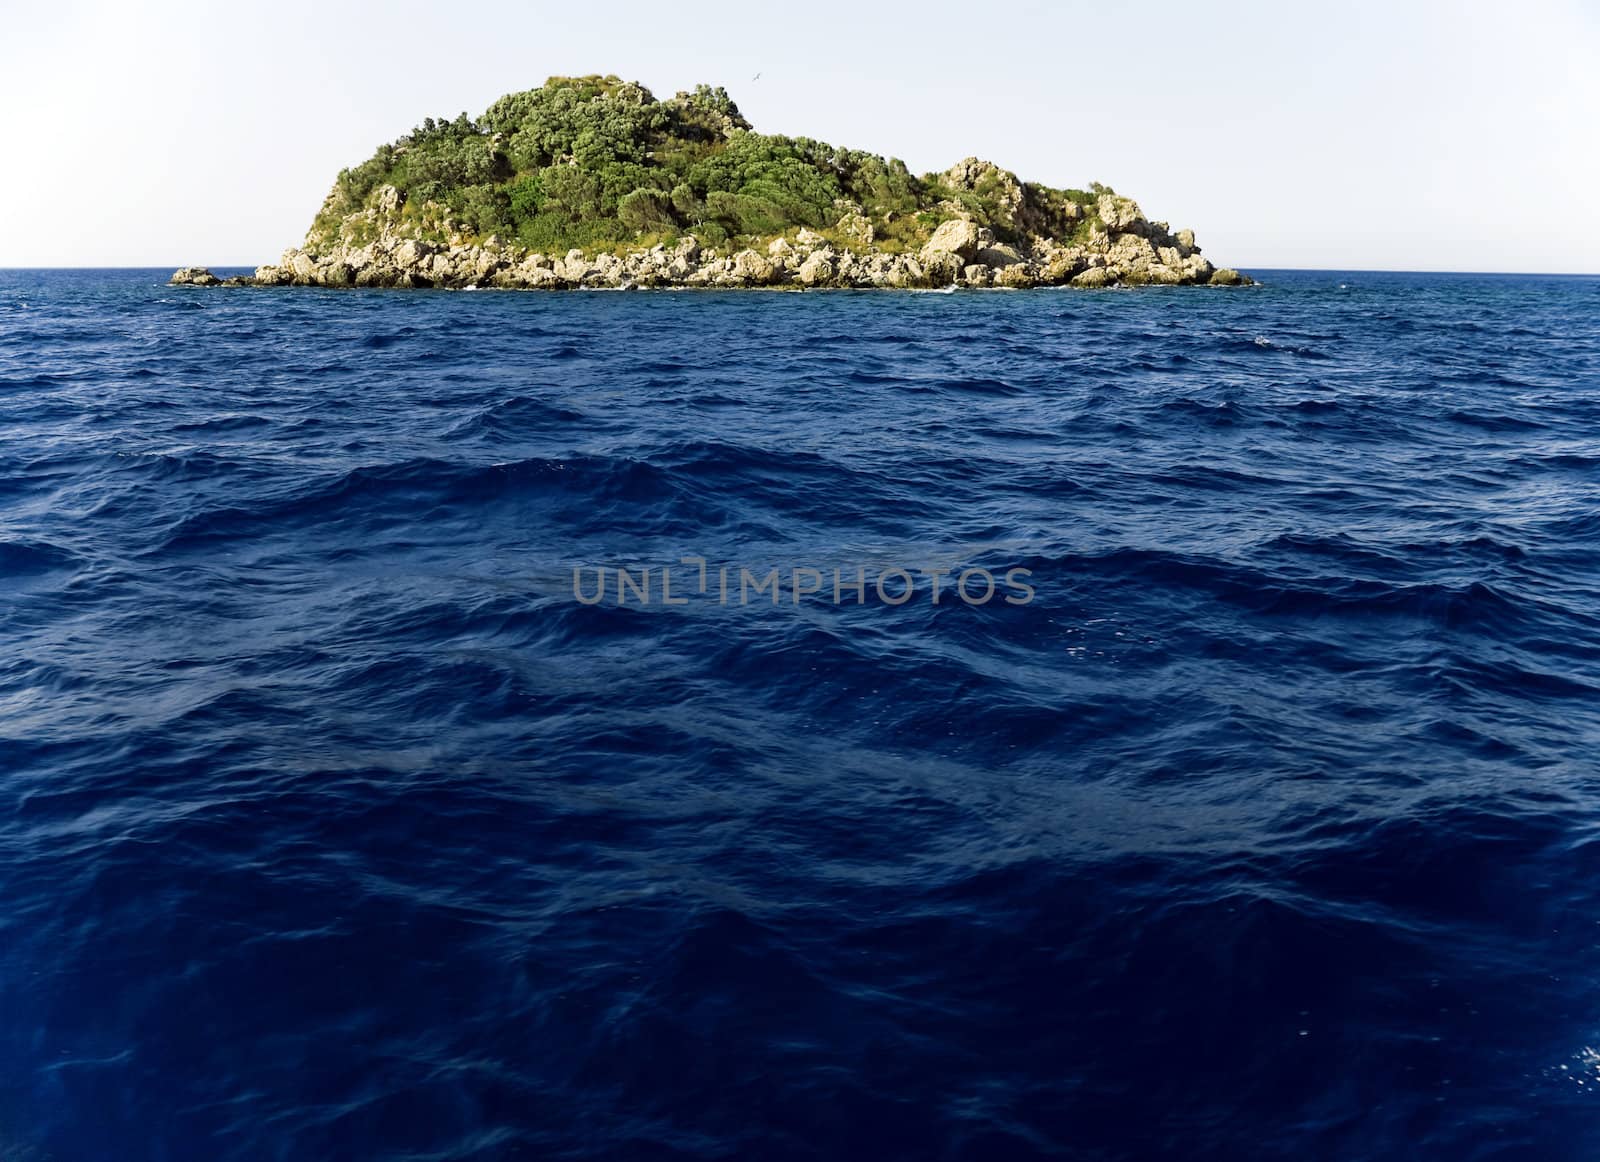 green island in the middle of the ocean waves on blue sky background